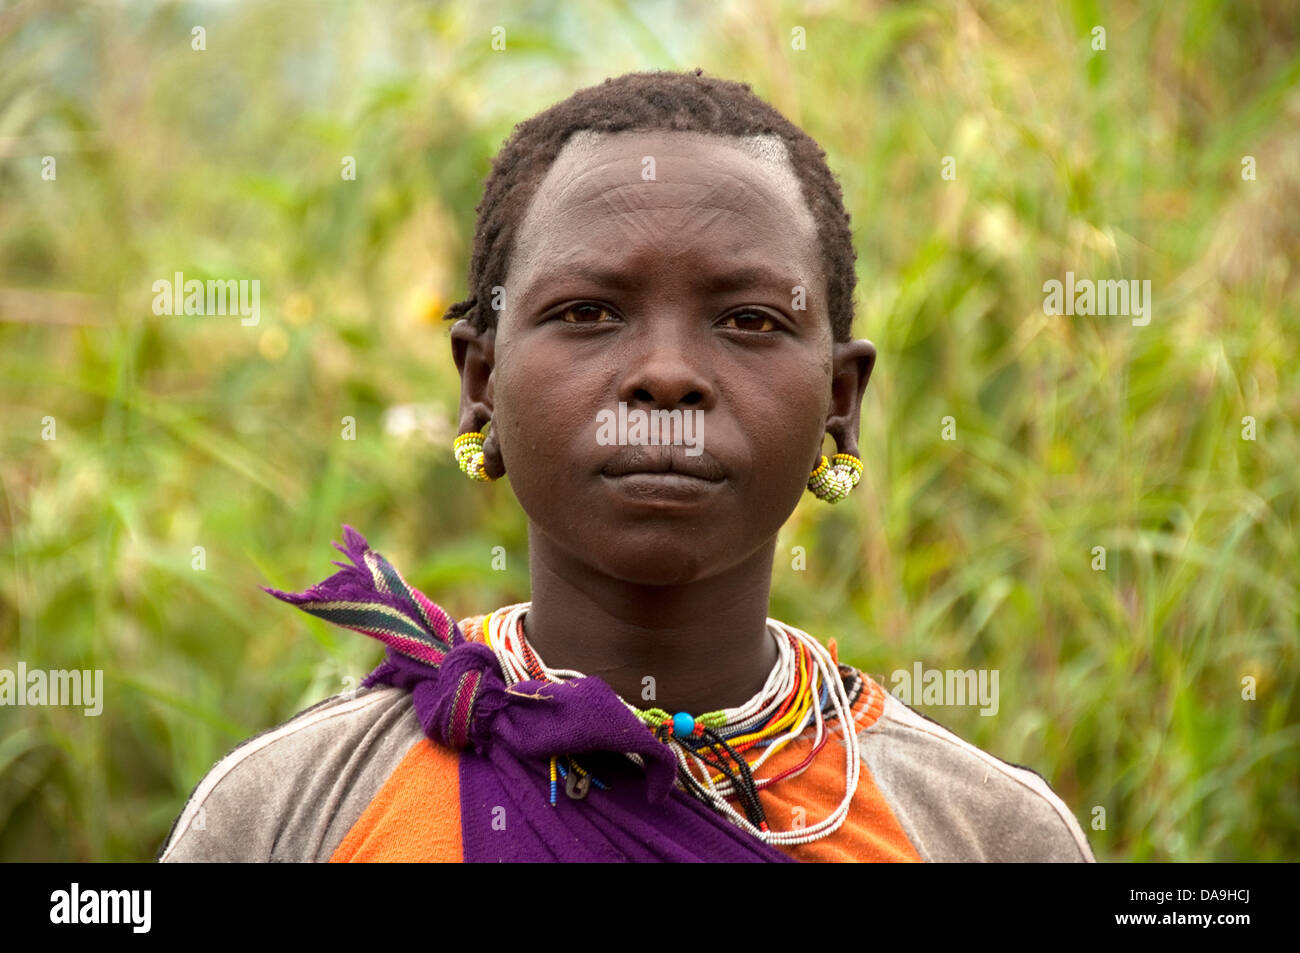 Kachipo girl with earrings, necklaces and scarifications on the forehead, Ethiopia Stock Photo